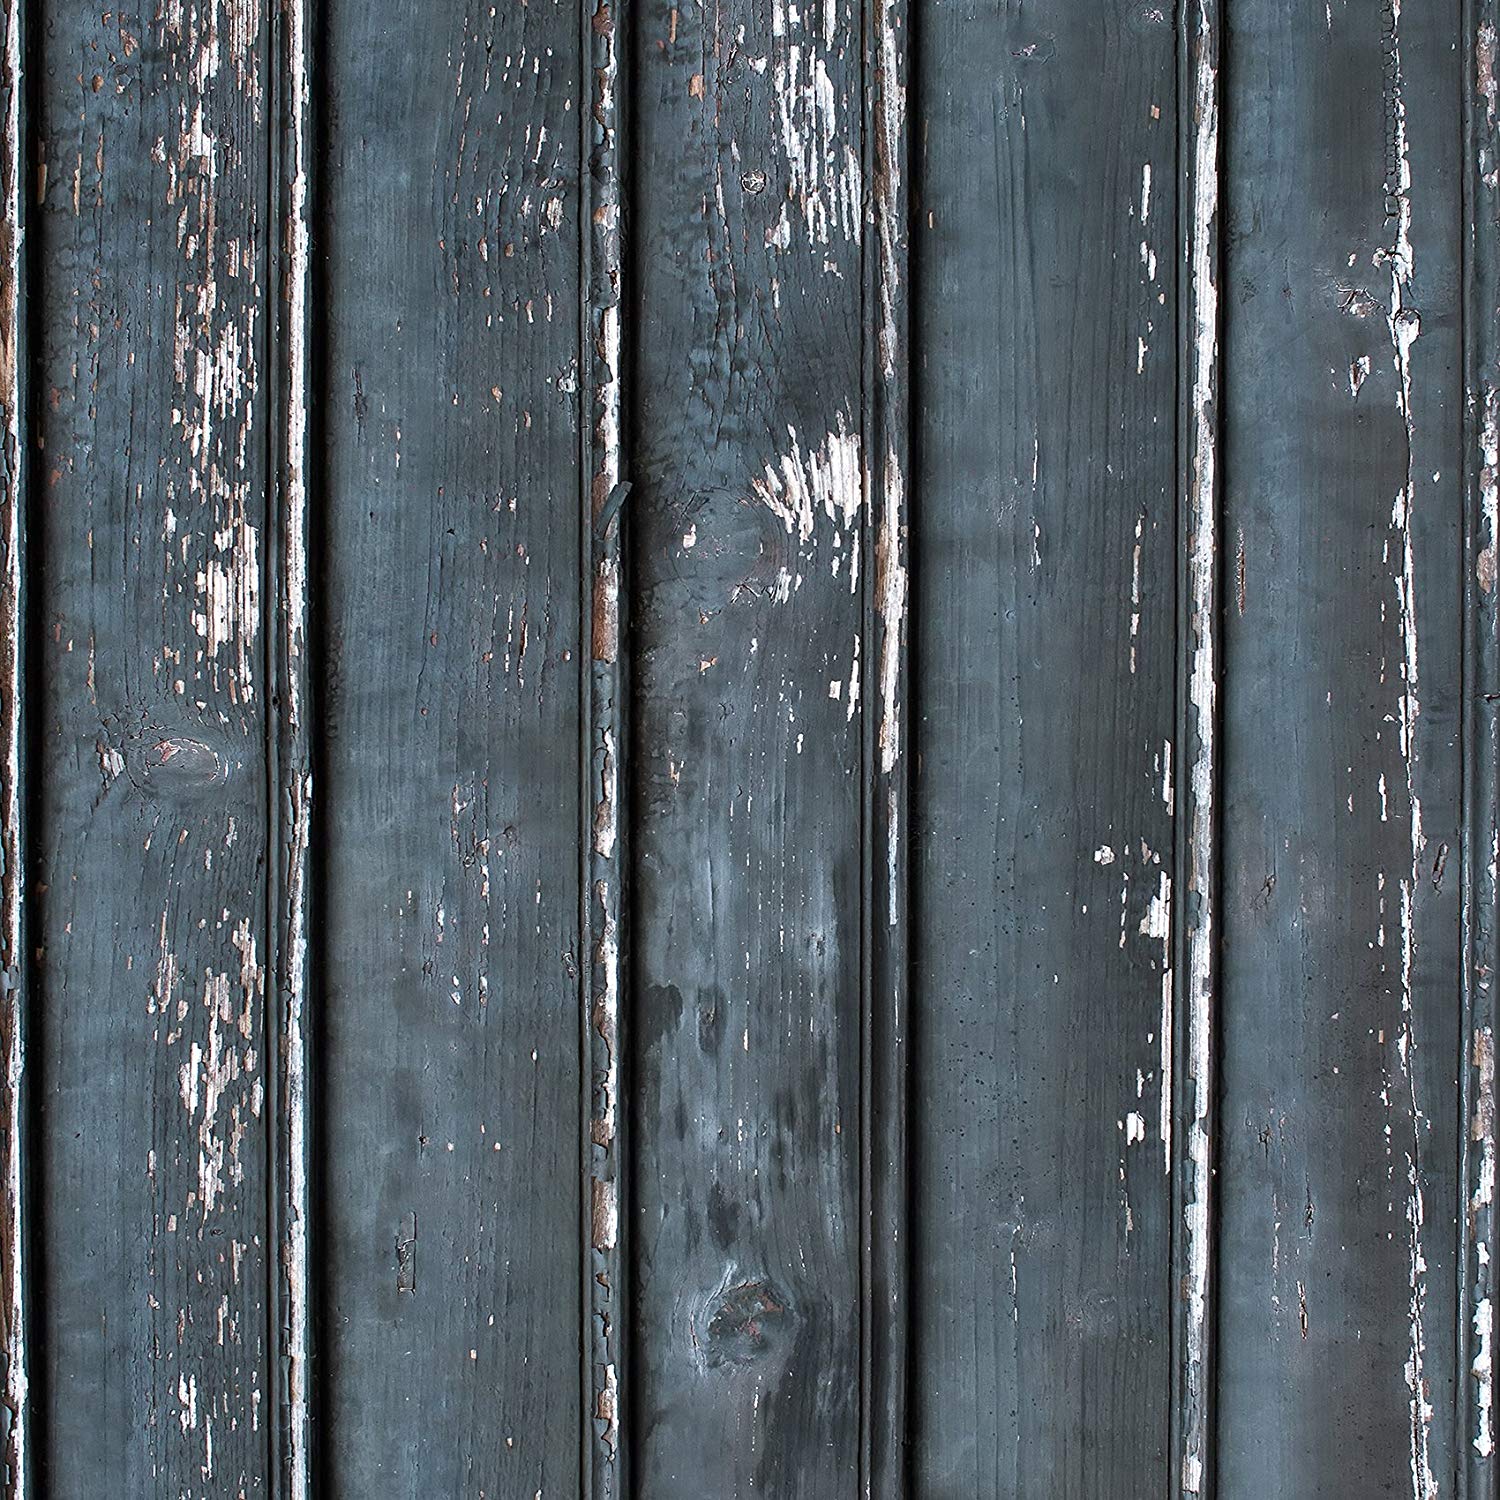 Rustic Distressed Wood Backdrop Photography Background #1789 Gray With Snow